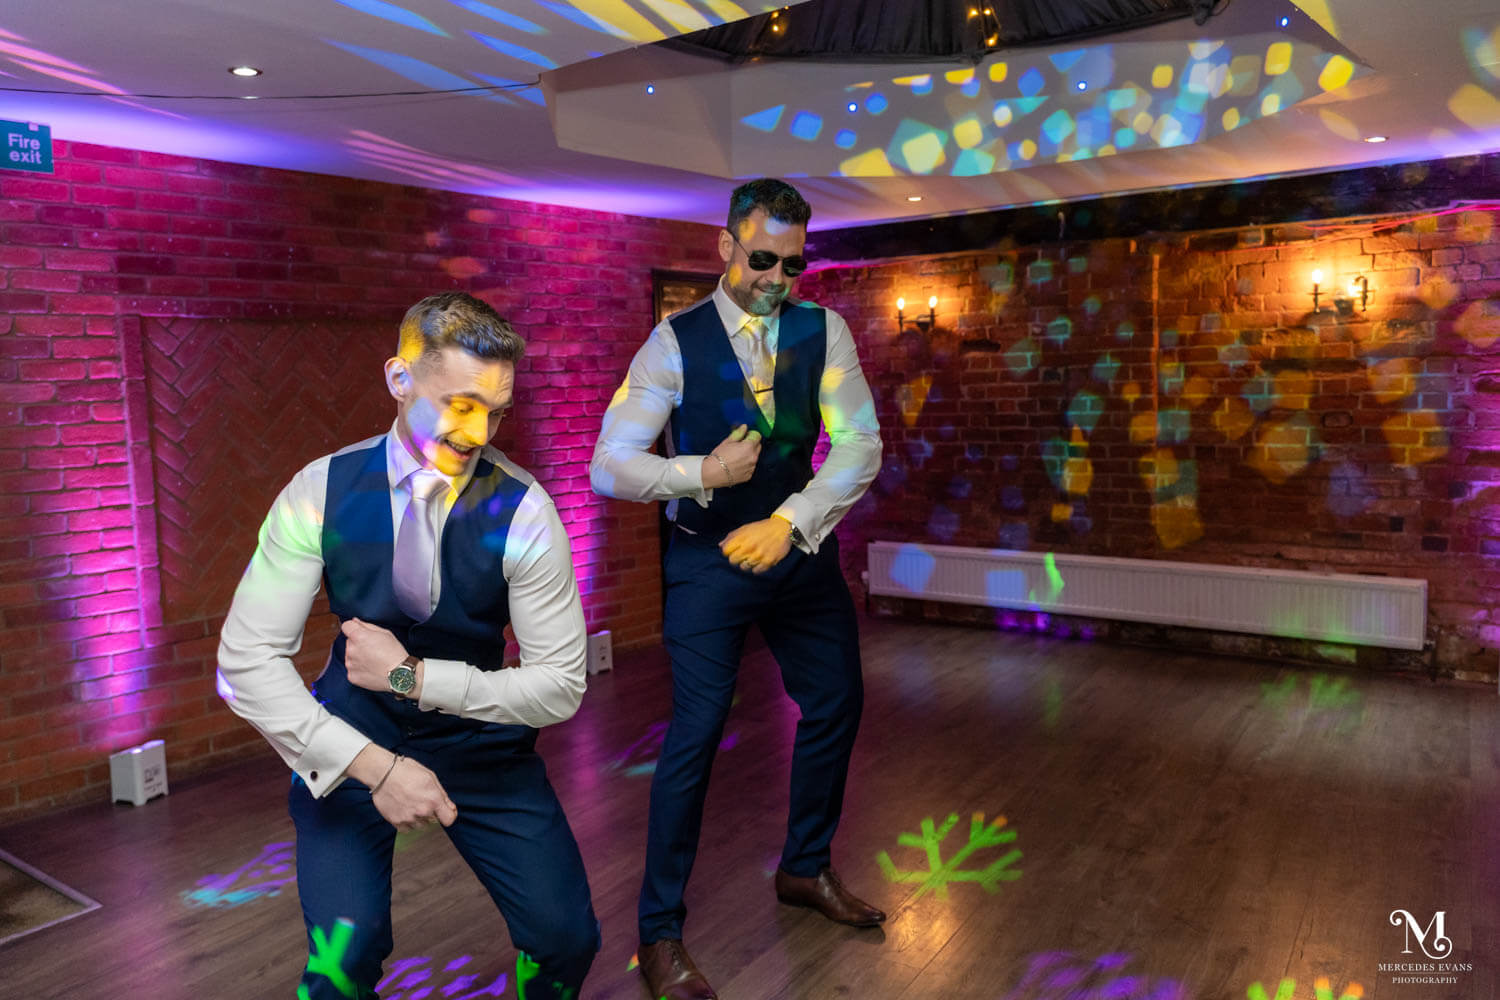 the groom and groomsmen do a dance routine on the dance floor with coloured lights